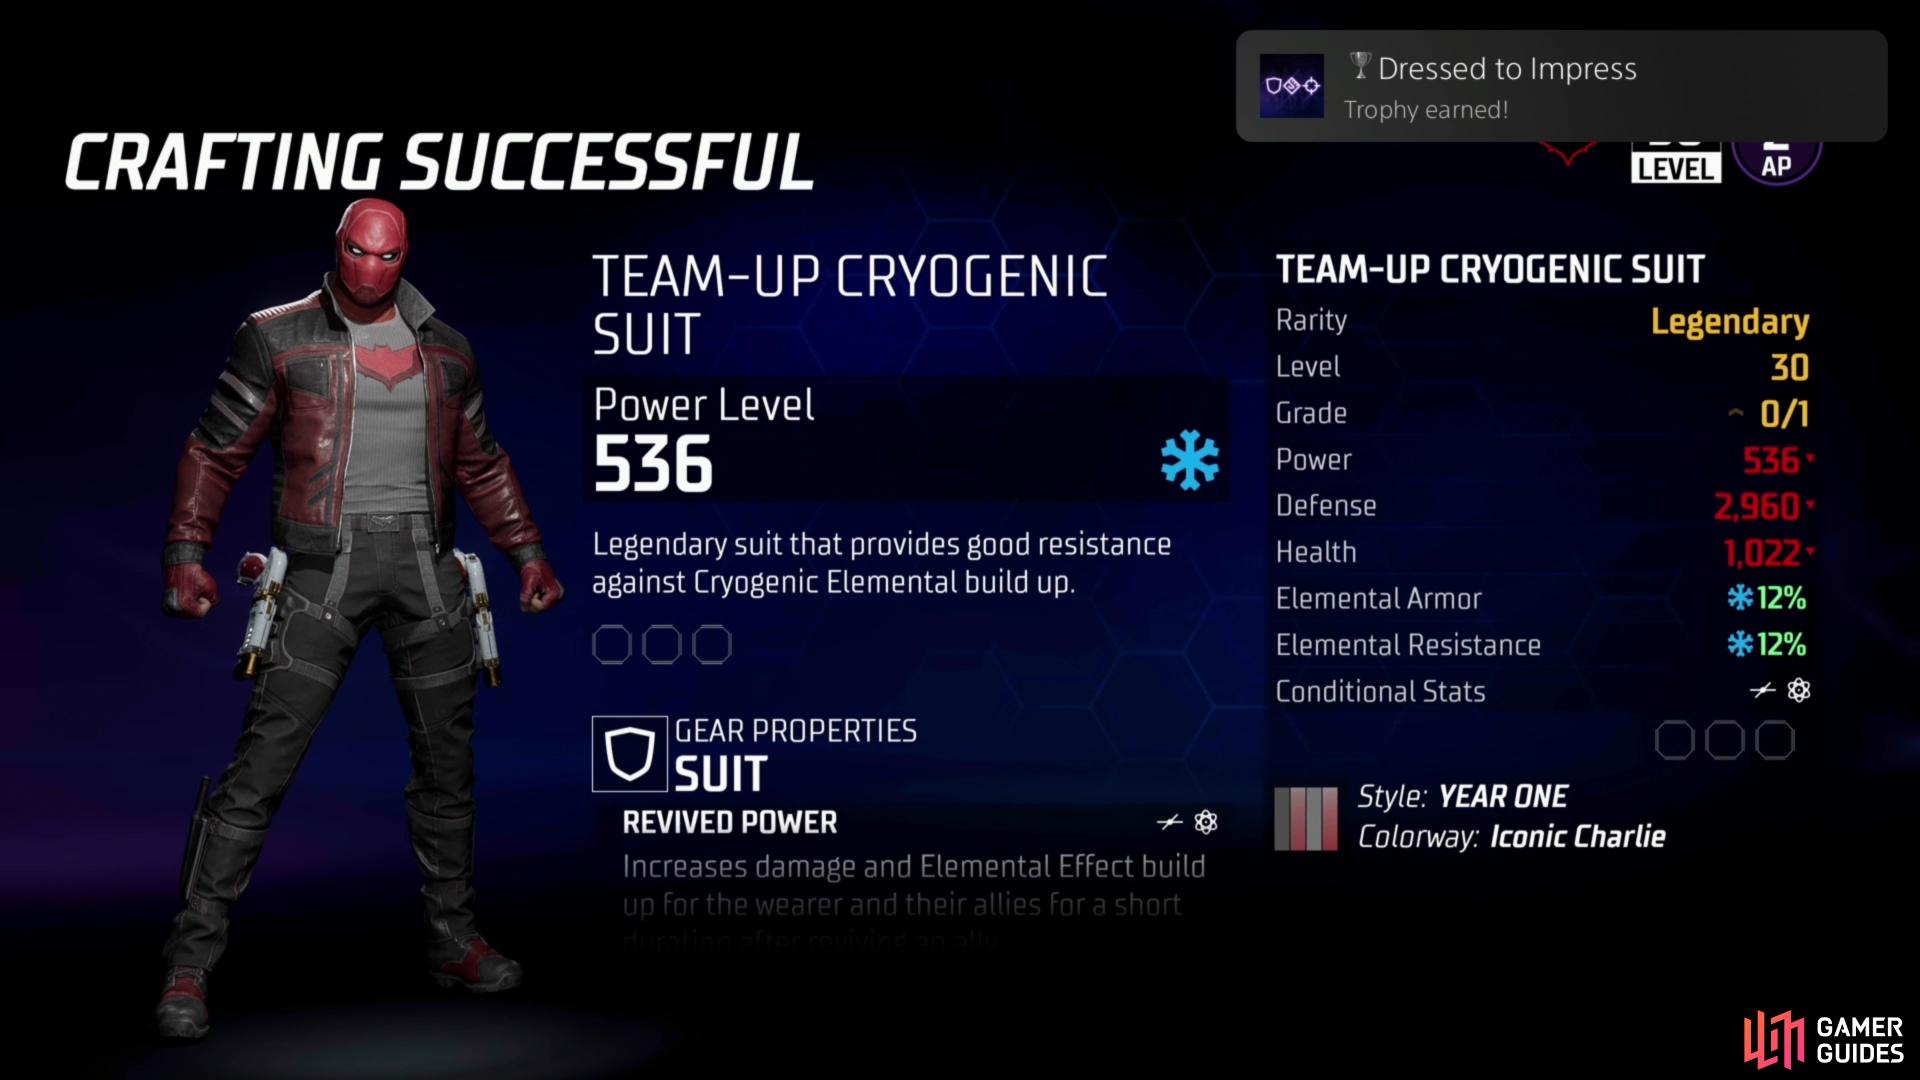 Crafted a legendary suit, melee weapon and ranged weapon to earn the "Dressed to Impress" achievement.